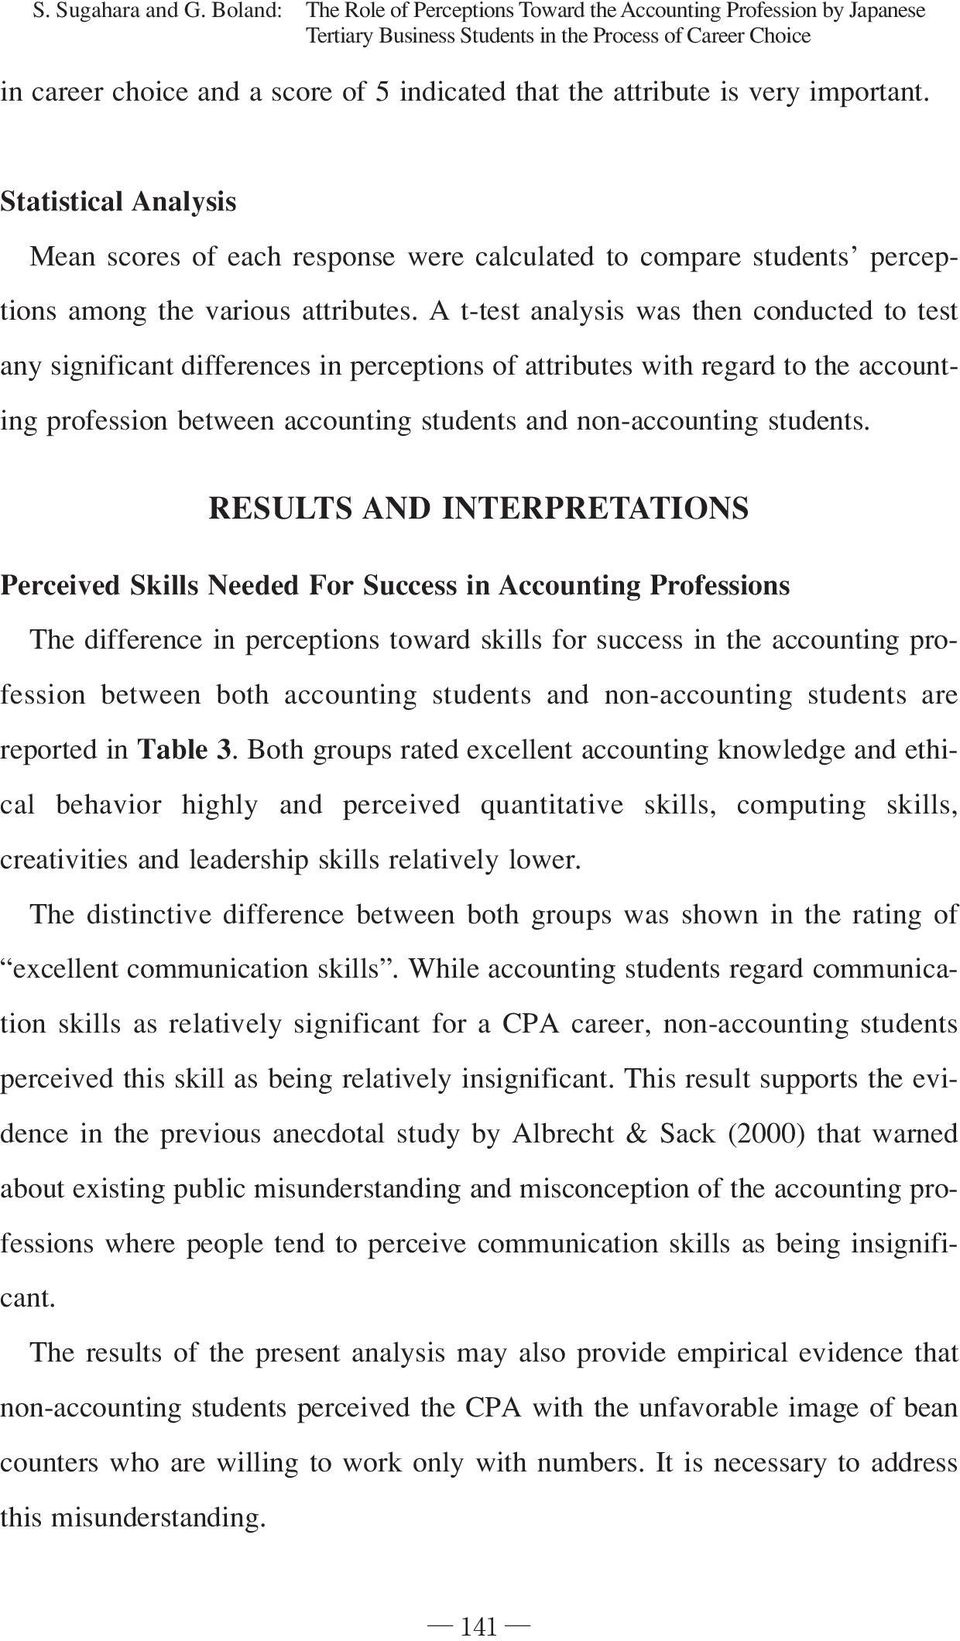 is very important. Statistical Analysis Mean scores of each response were calculated to compare students perceptions among the various attributes.